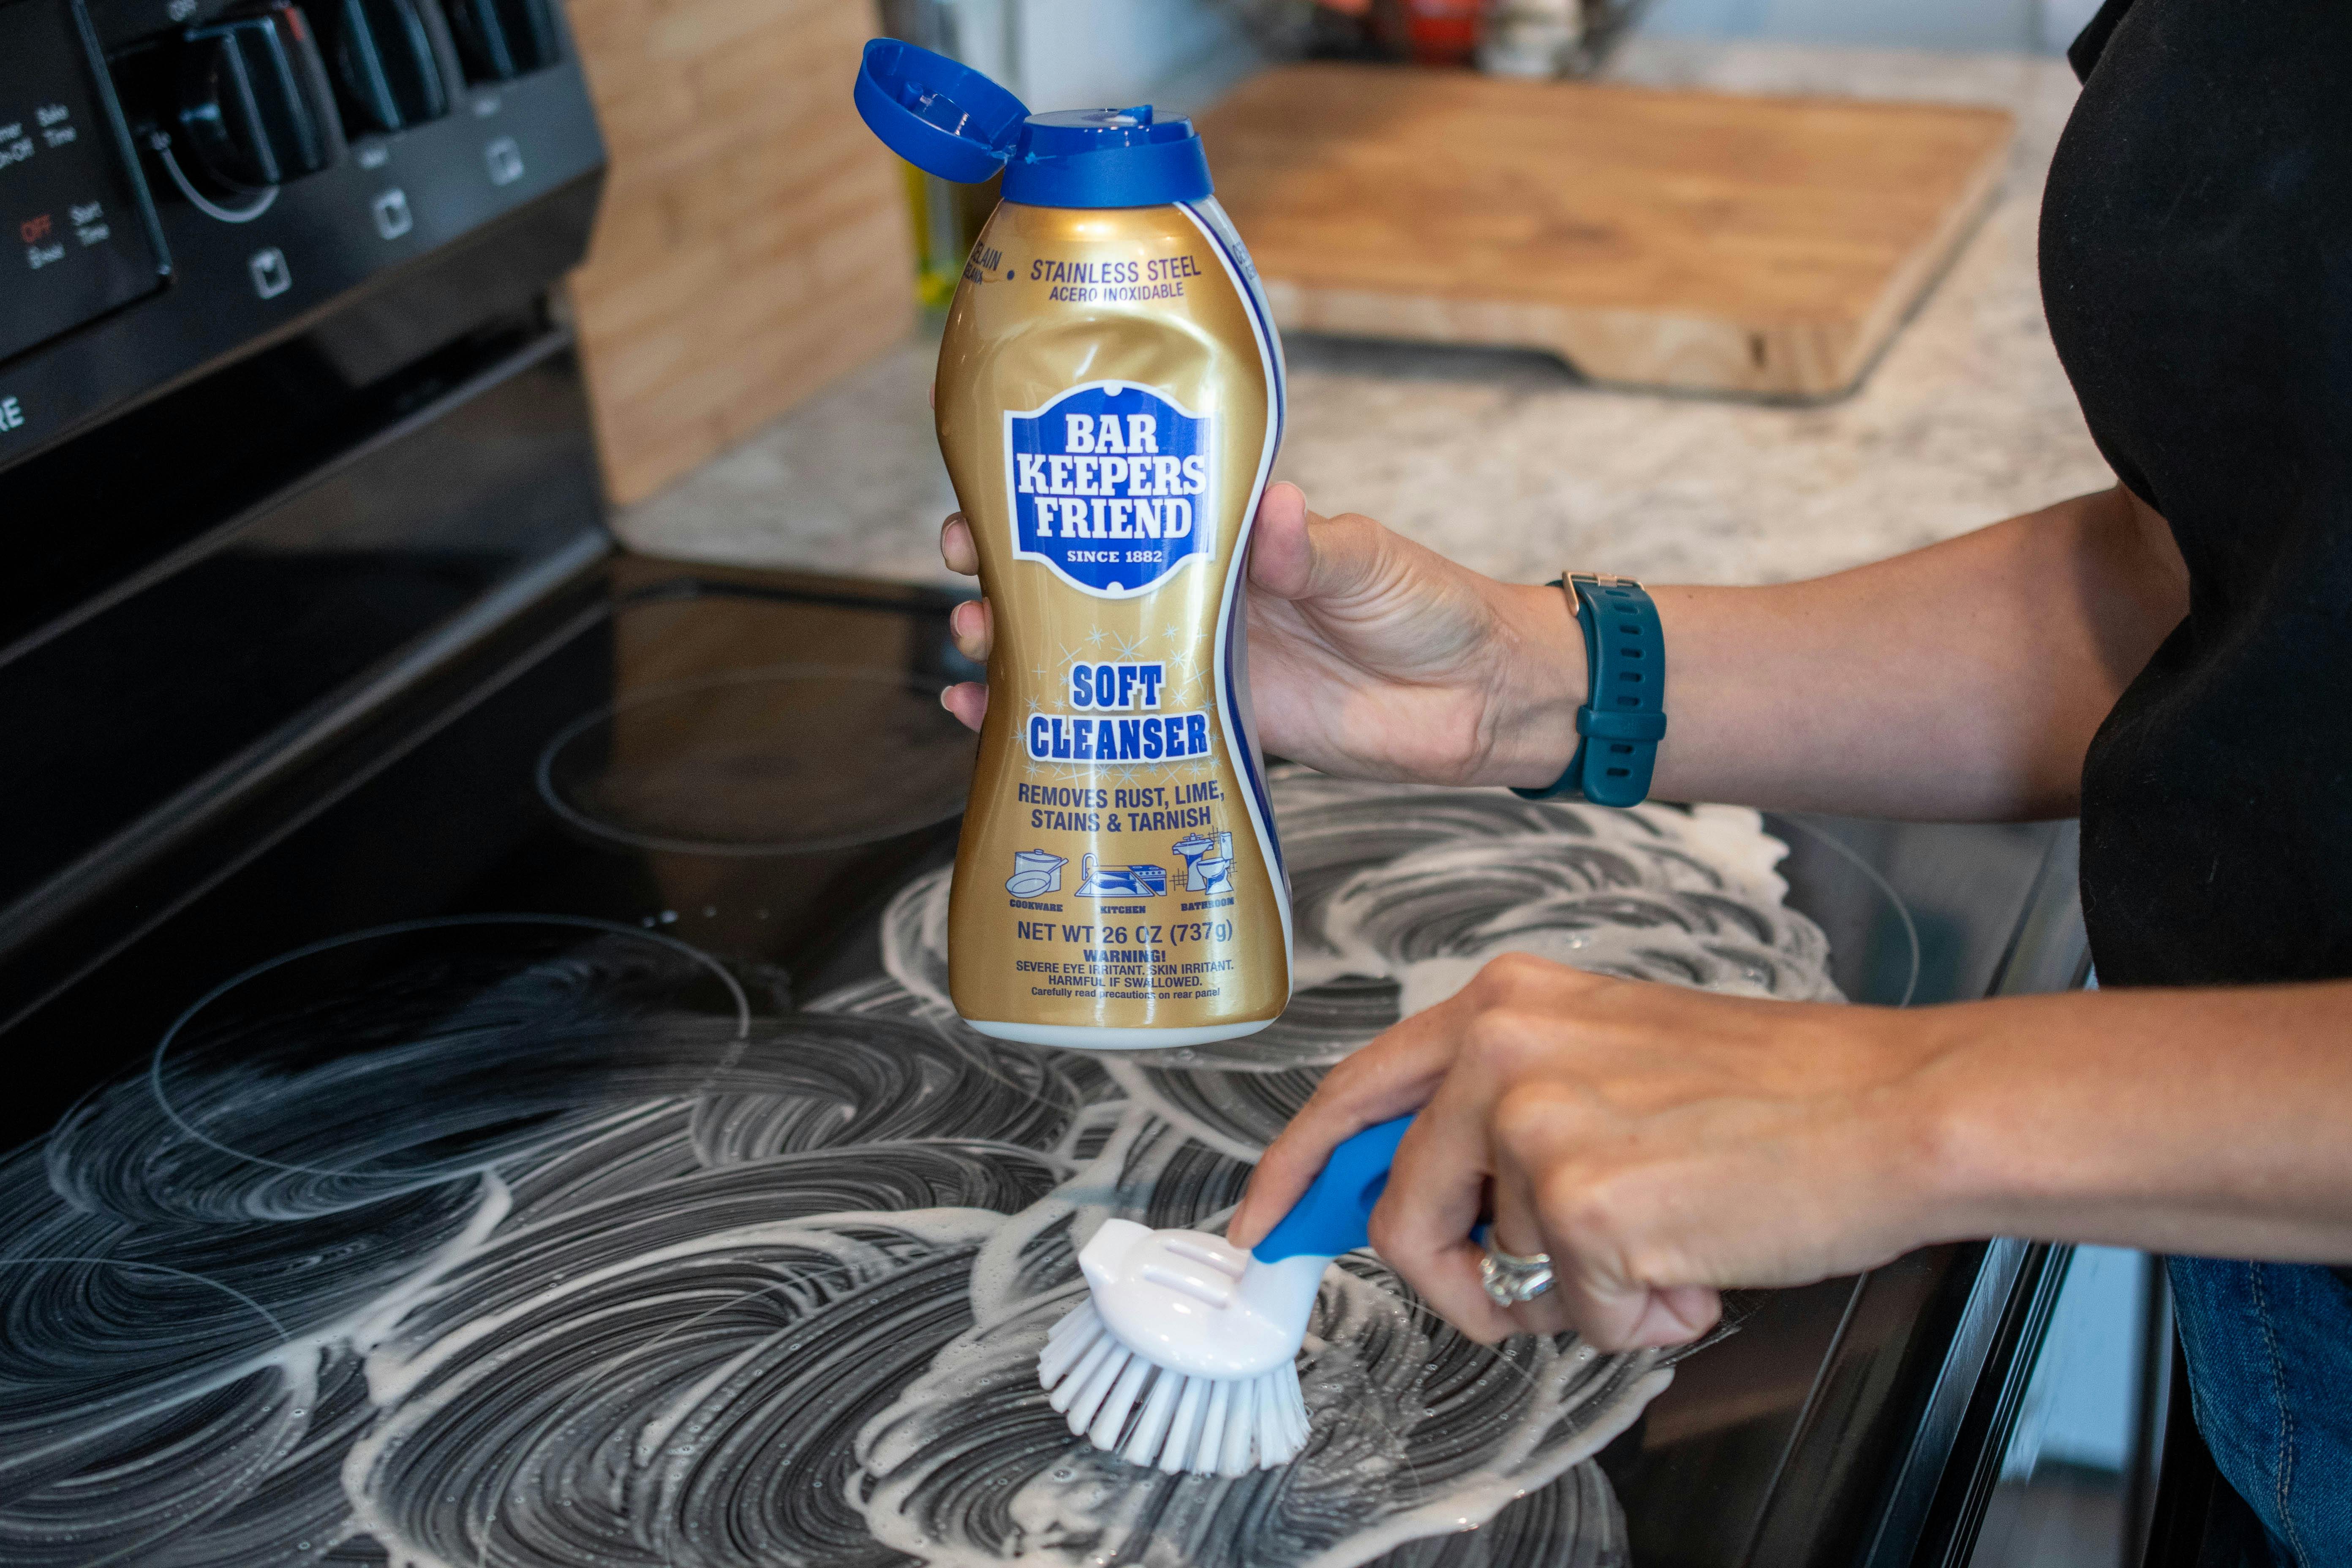 25 Easy Ways to Clean Your Glass Stove Top That Actually Work